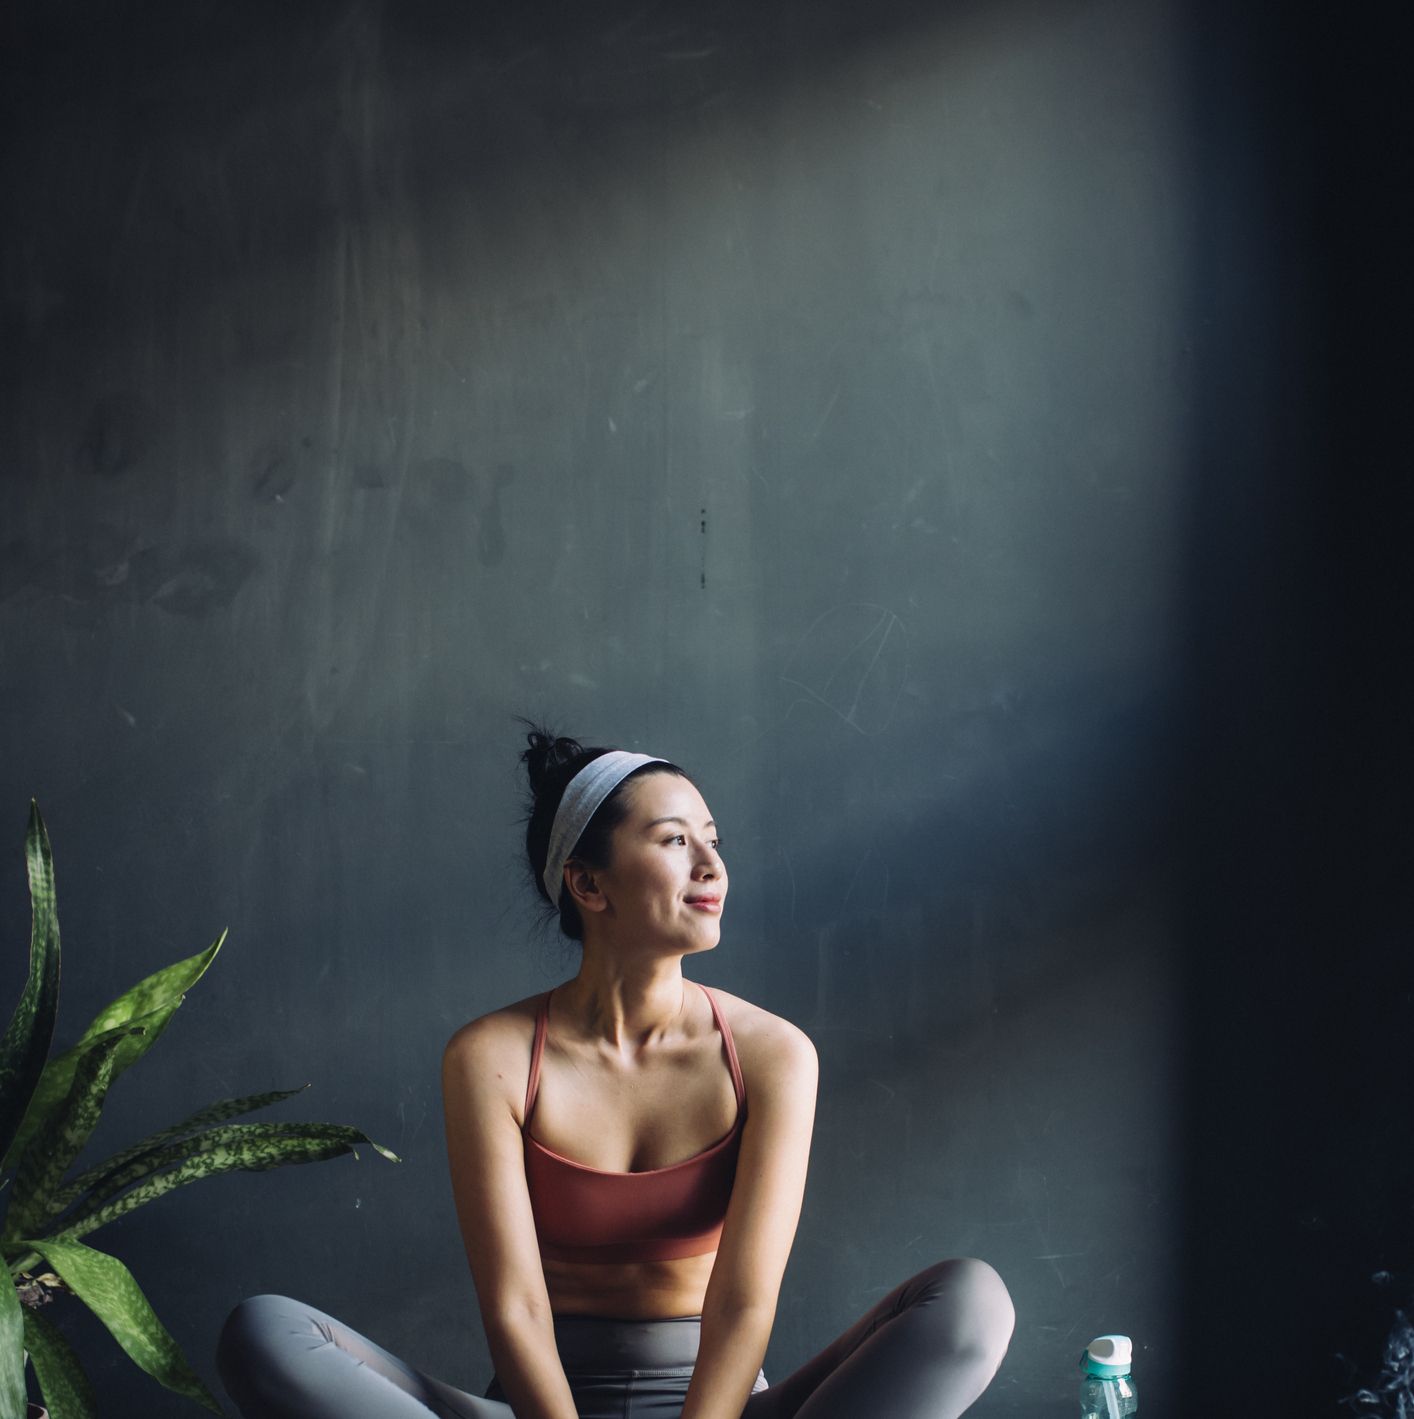 What yoga clothes should you wear to yin yoga?